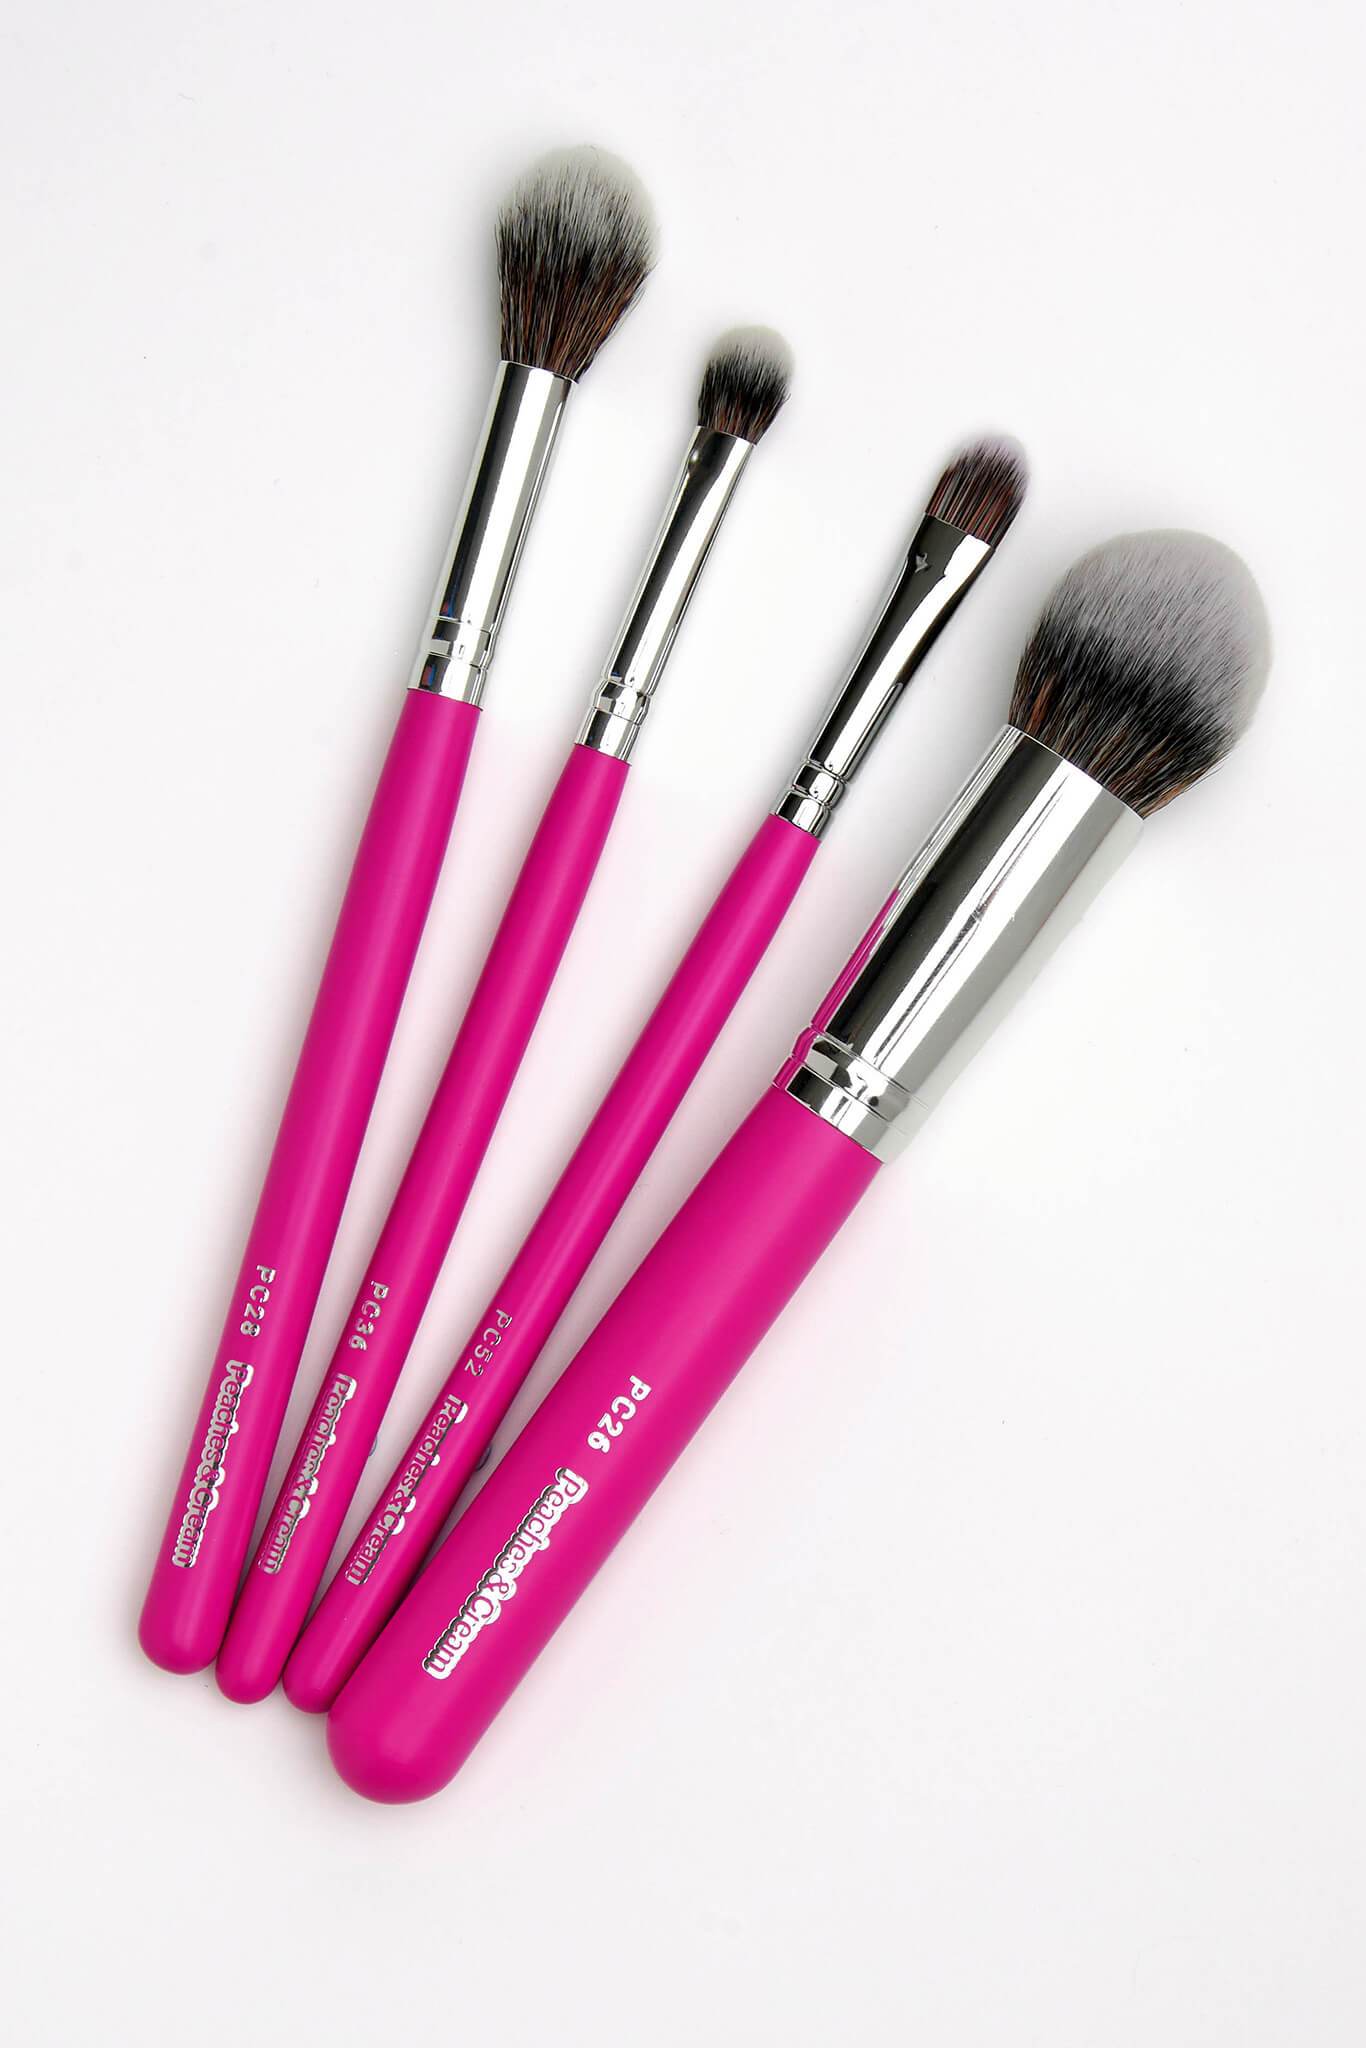 Makeup Brushes - ThedailyStruggle